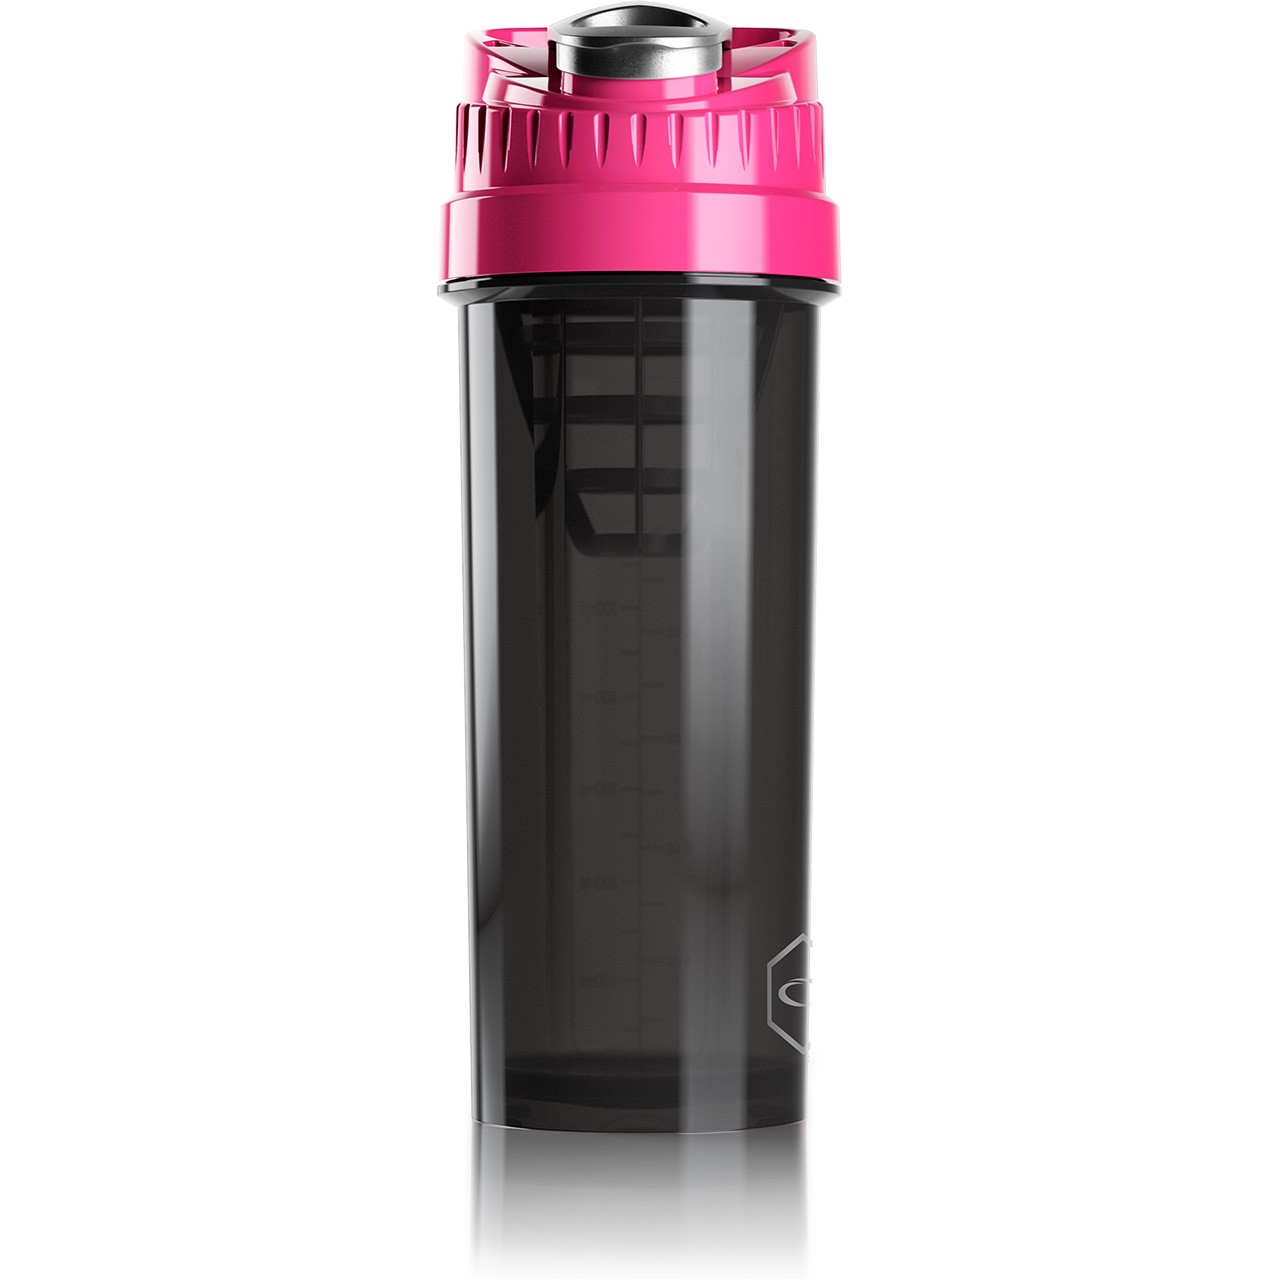 New Protein Shaker Cyclone Cup Pink 950 ml